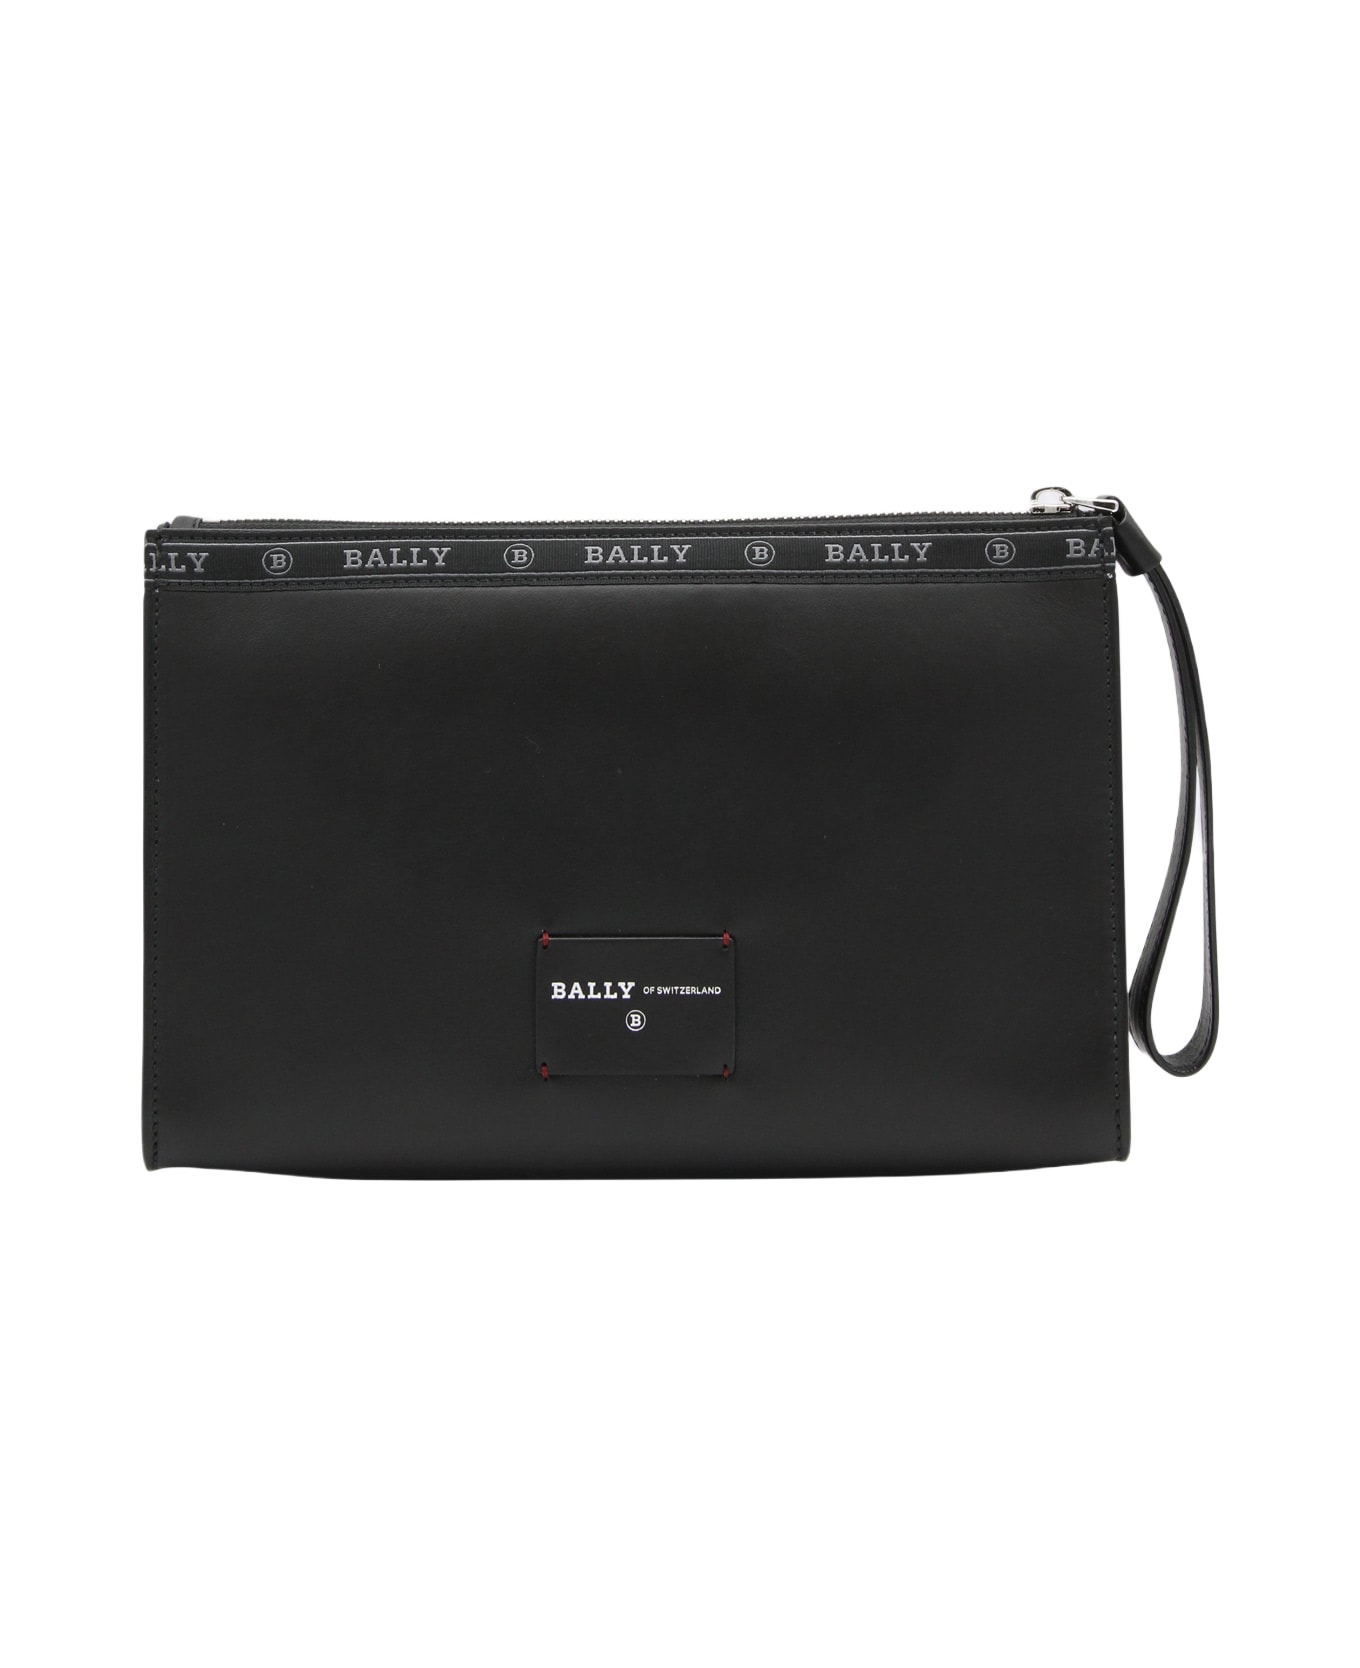 Bally Black Leather Pouches - Black バッグ